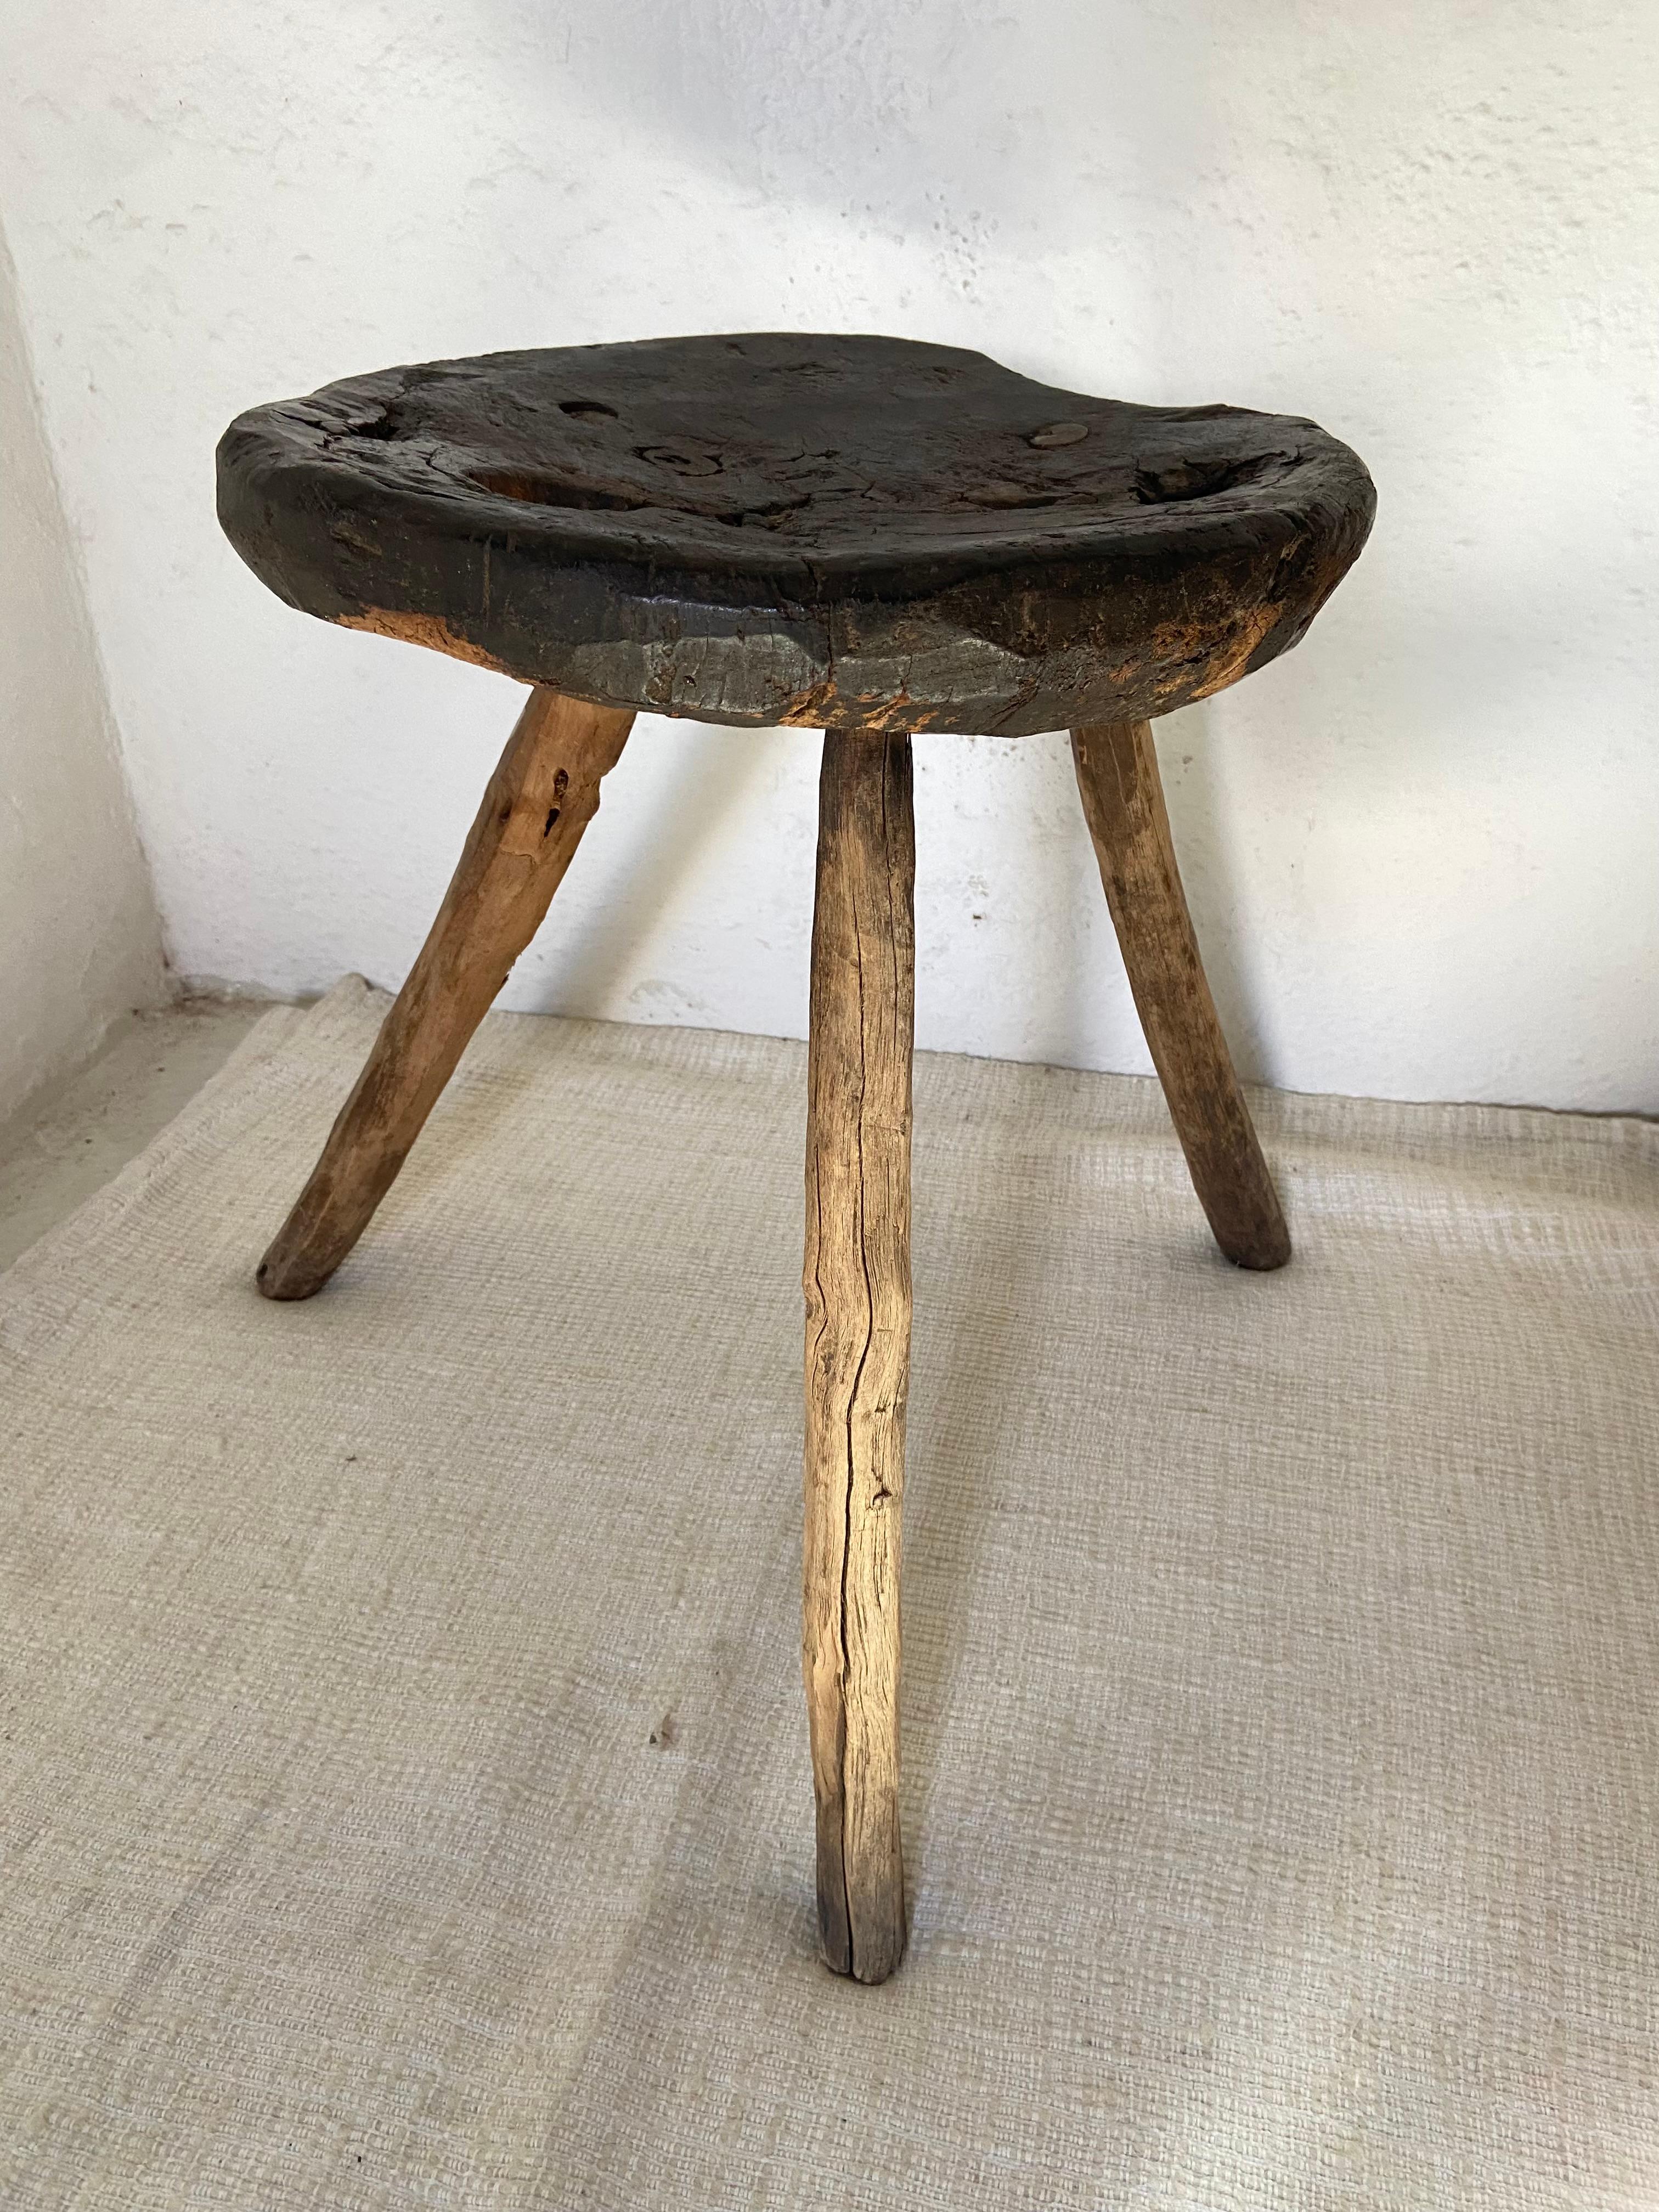 Primitive Mesquite Stool by Artefakto
Unique piece.
Dimensions: Ø 33 x H 40 cm.
Materials: Mesquite wood.

Guanajuato, Mexico, Early 1900s

Artefakto opened its doors on the Riviera Nayarit coastline in 2010. With an unrelenting passion for